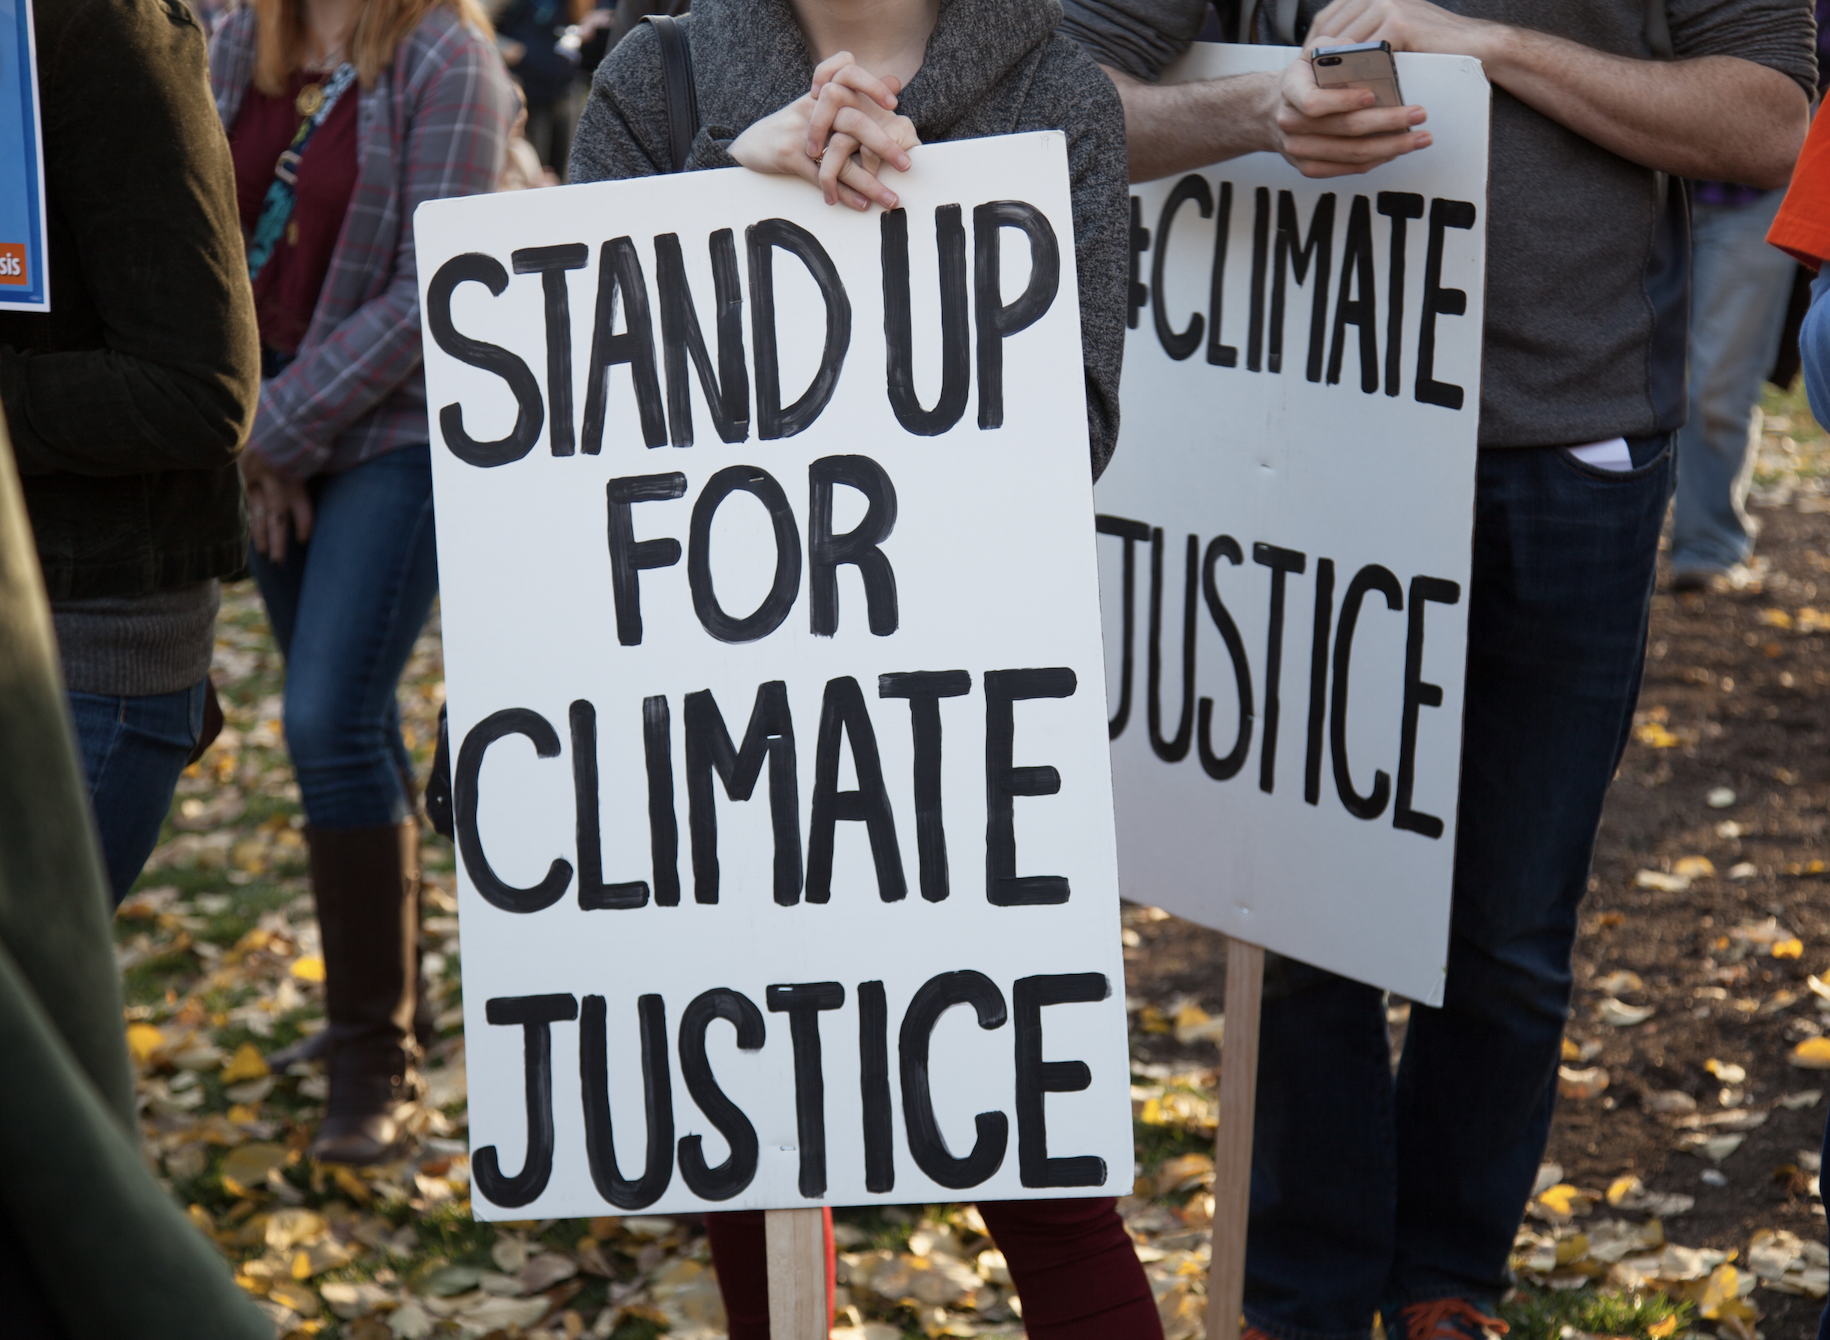 Image of a sign saying "Stand Up for Climate Justice" 